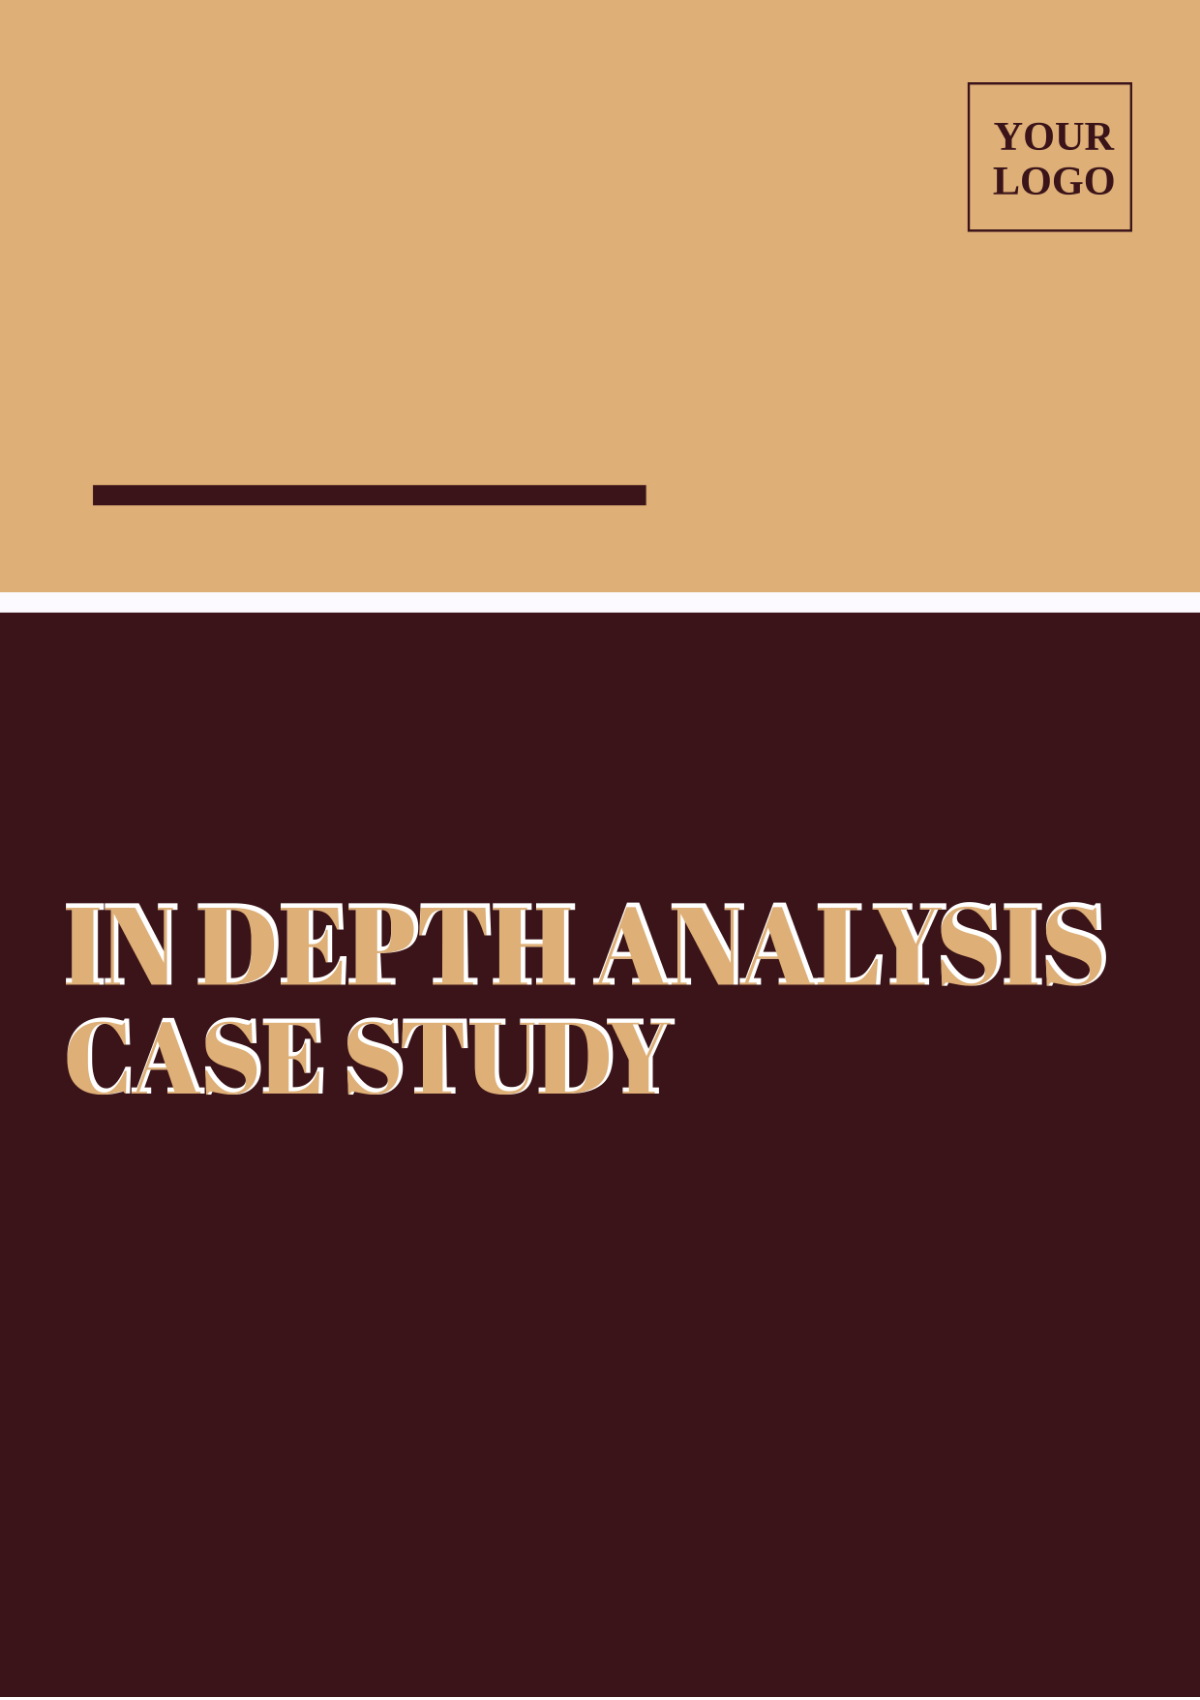 Free In Depth Analysis Case Study Template